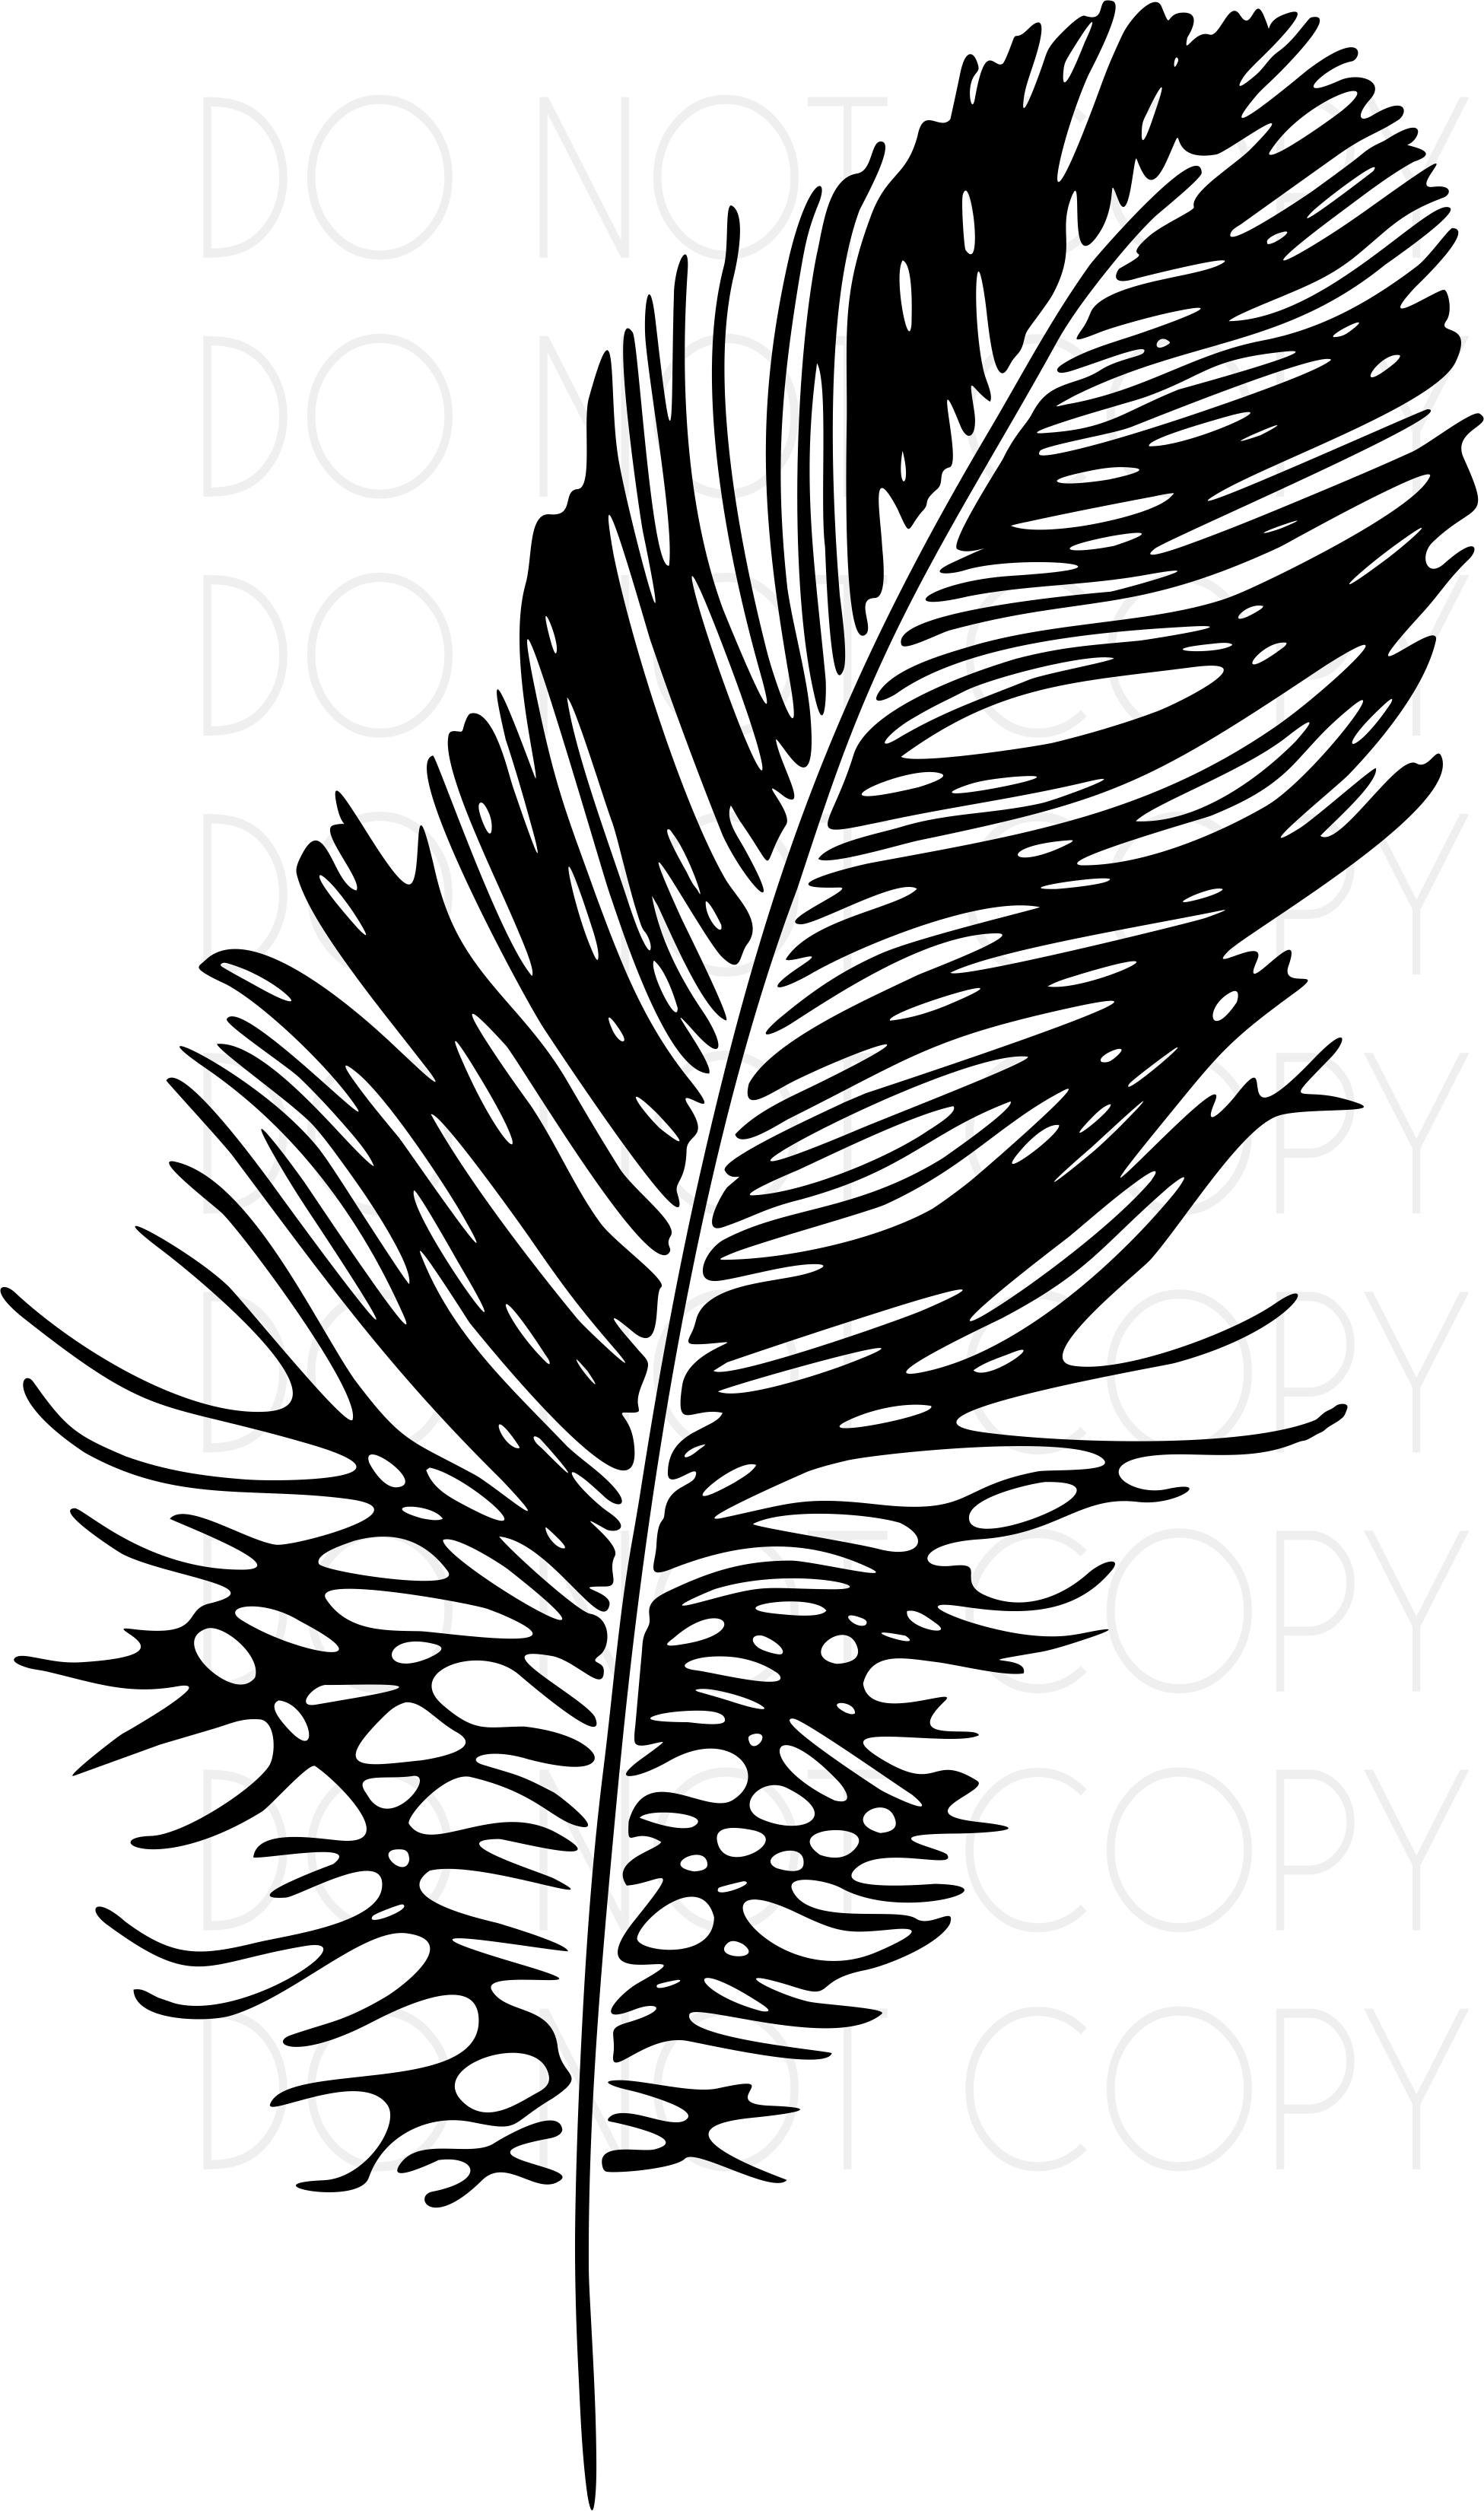 Download BOHO Feather SVG Cut and Print instant download digital ...